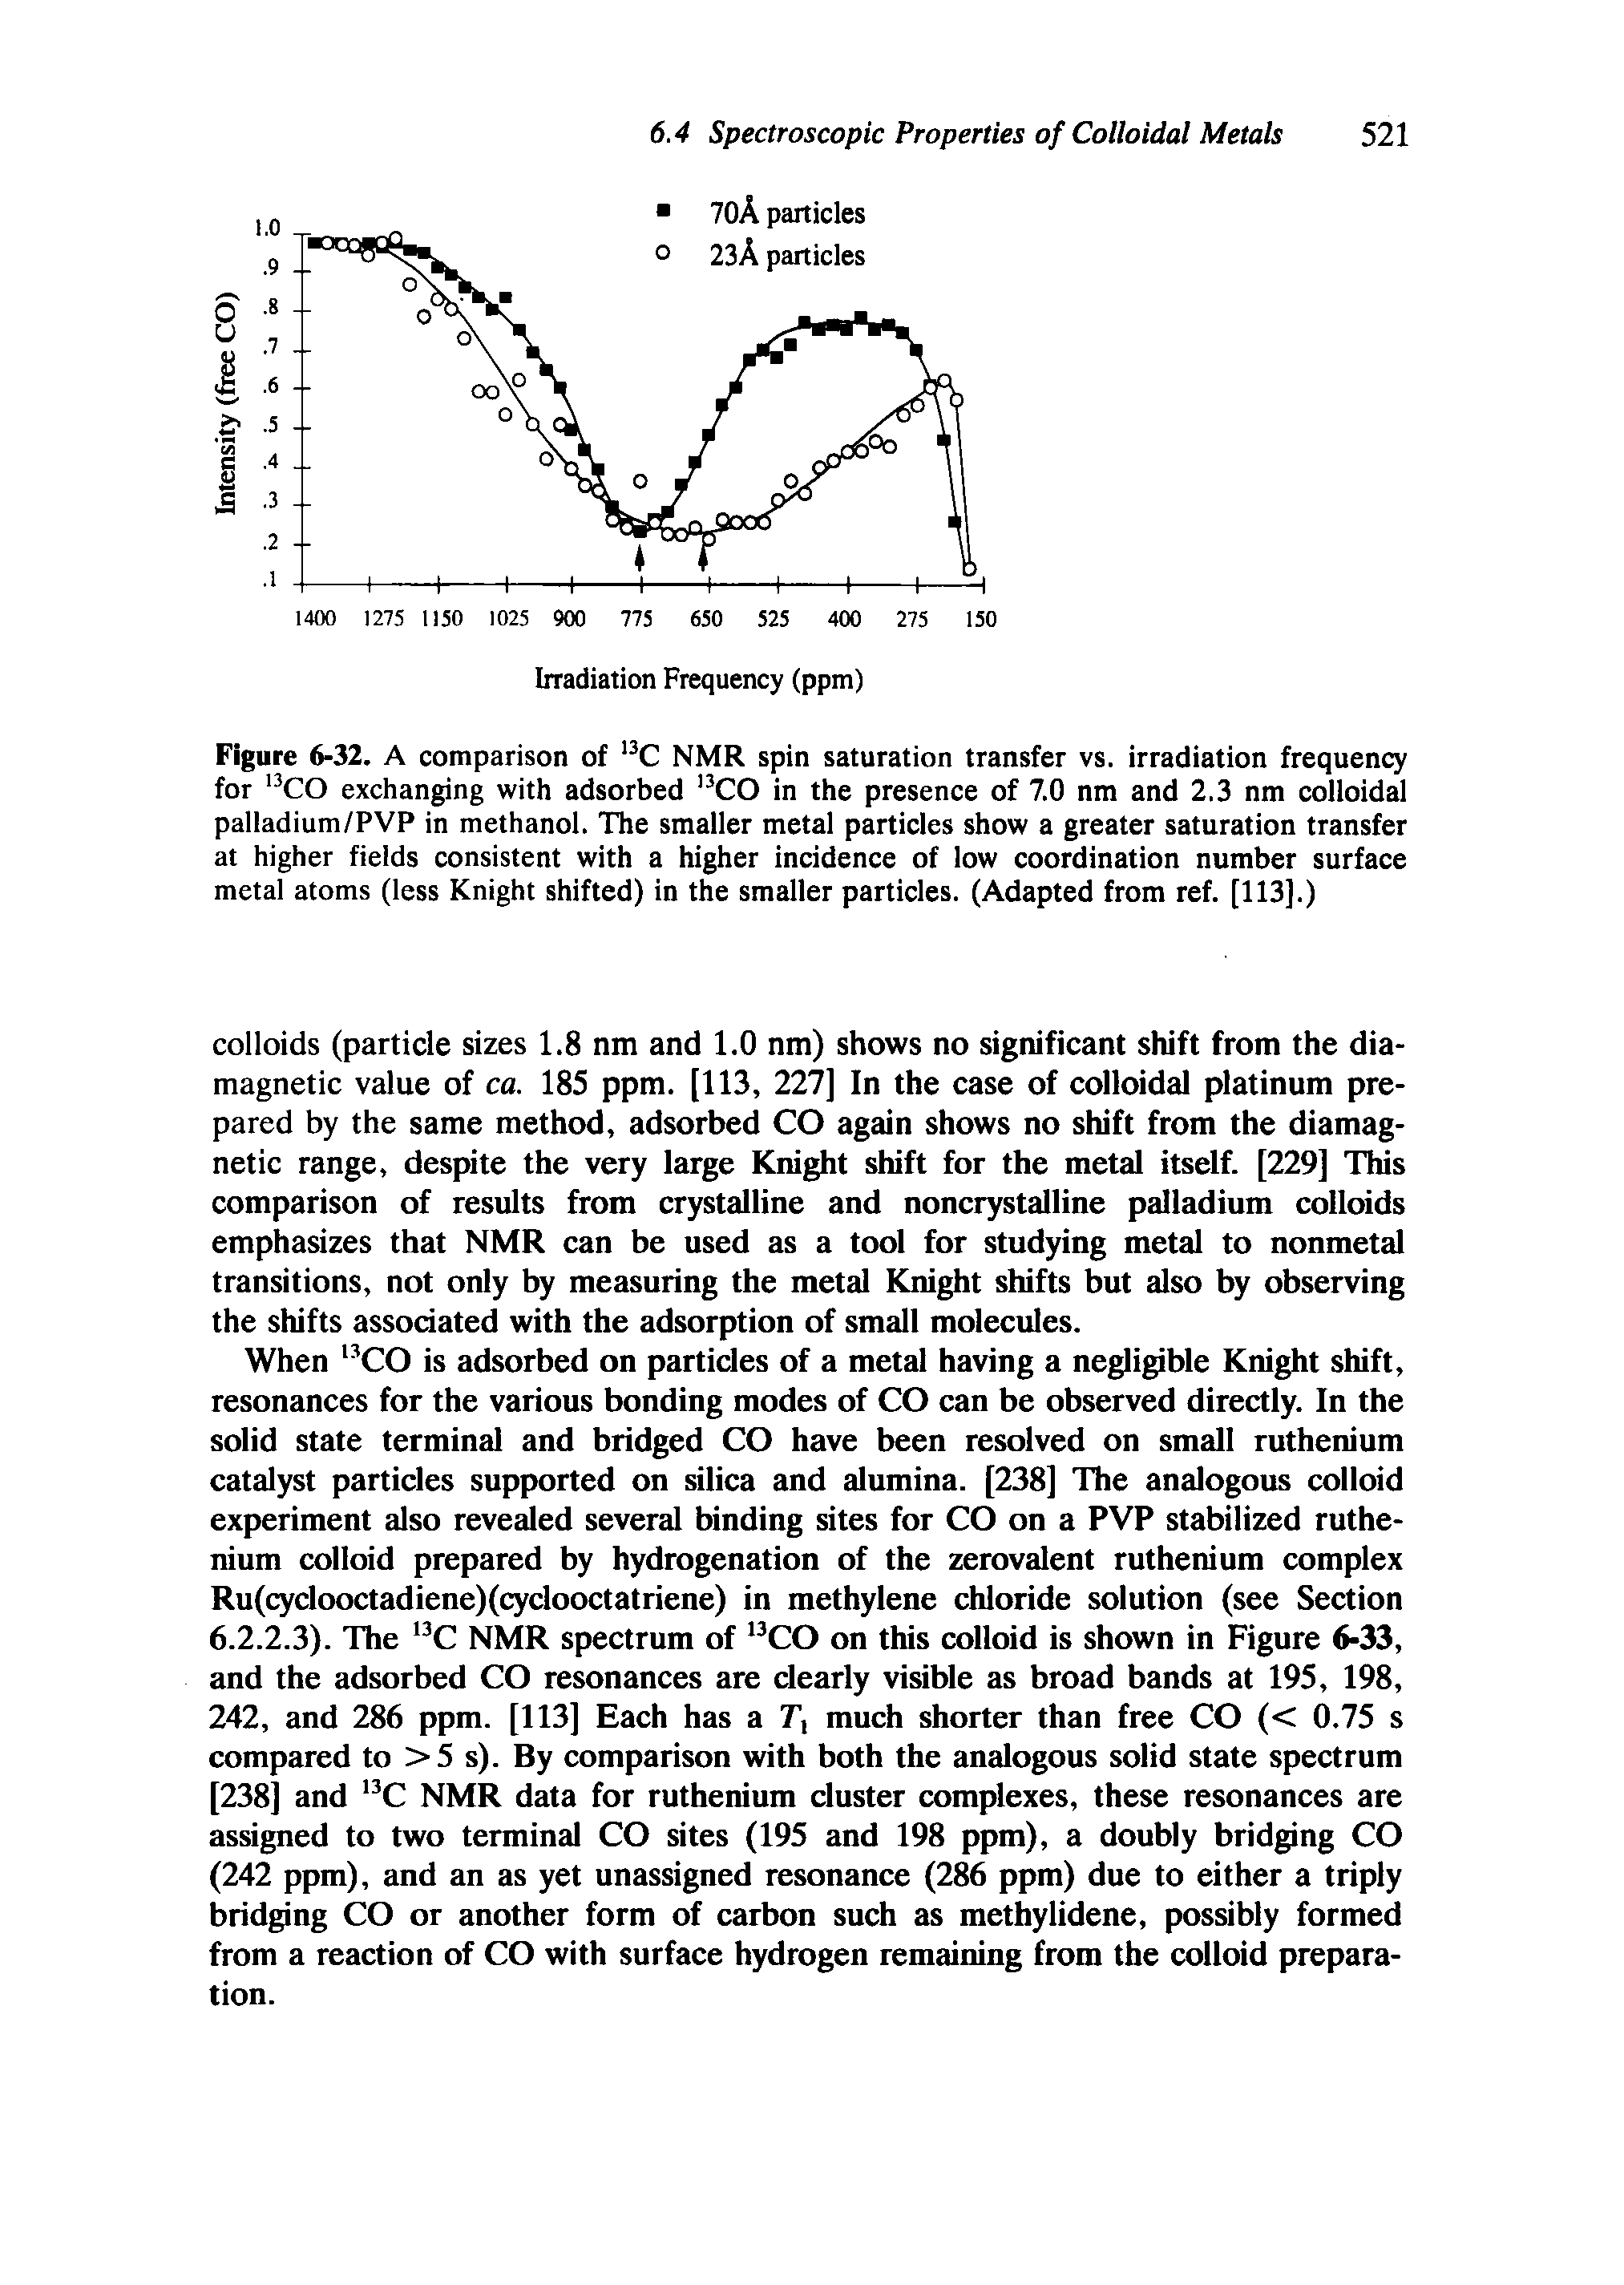 Figure 6-32. A comparison of NMR spin saturation transfer vs. irradiation frequency for CO exchanging with adsorbed CO in the presence of 7.0 nm and 2.3 nm colloidal palladium/PVP in methanol. The smaller metal particles show a greater saturation transfer at higher fields consistent with a higher incidence of low coordination number surface metal atoms (less Knight shifted) in the smaller particles. (Adapted from ref. [113].)...